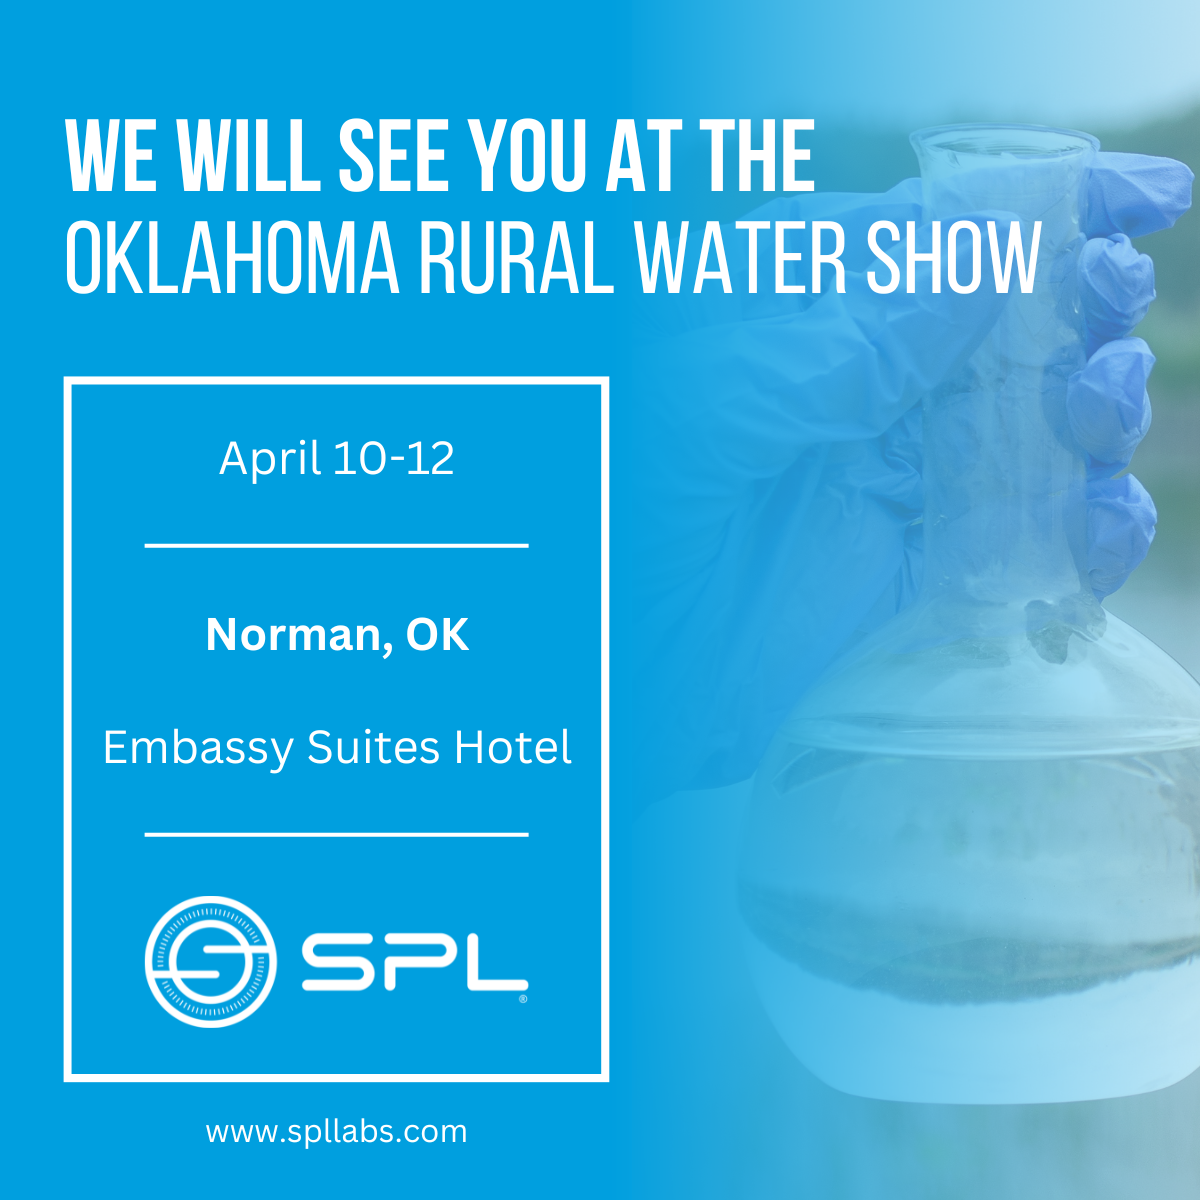 SPL at the Oklahoma Rural Water Show